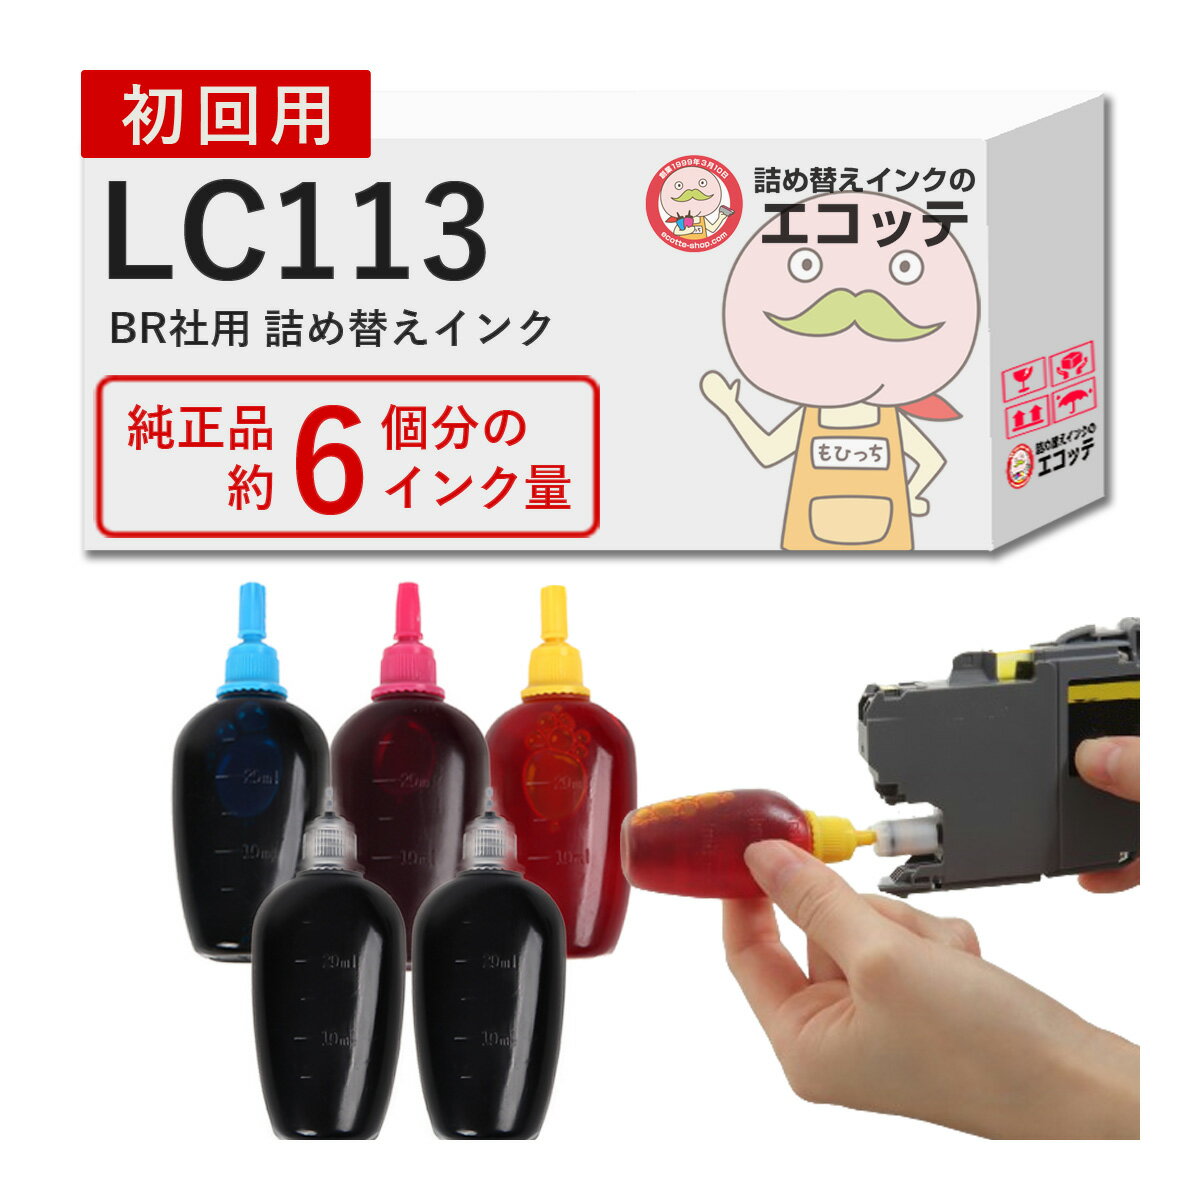 LC113-4PK BR社用 純正用詰め替えインク ビギナーセット 30ml×5本 ┃ DCP-J4215N DCP-J4210N MFC-J6570CDW MFC-J4910CDW MFC-J4510N PRIVIO NEO / PRIVIO